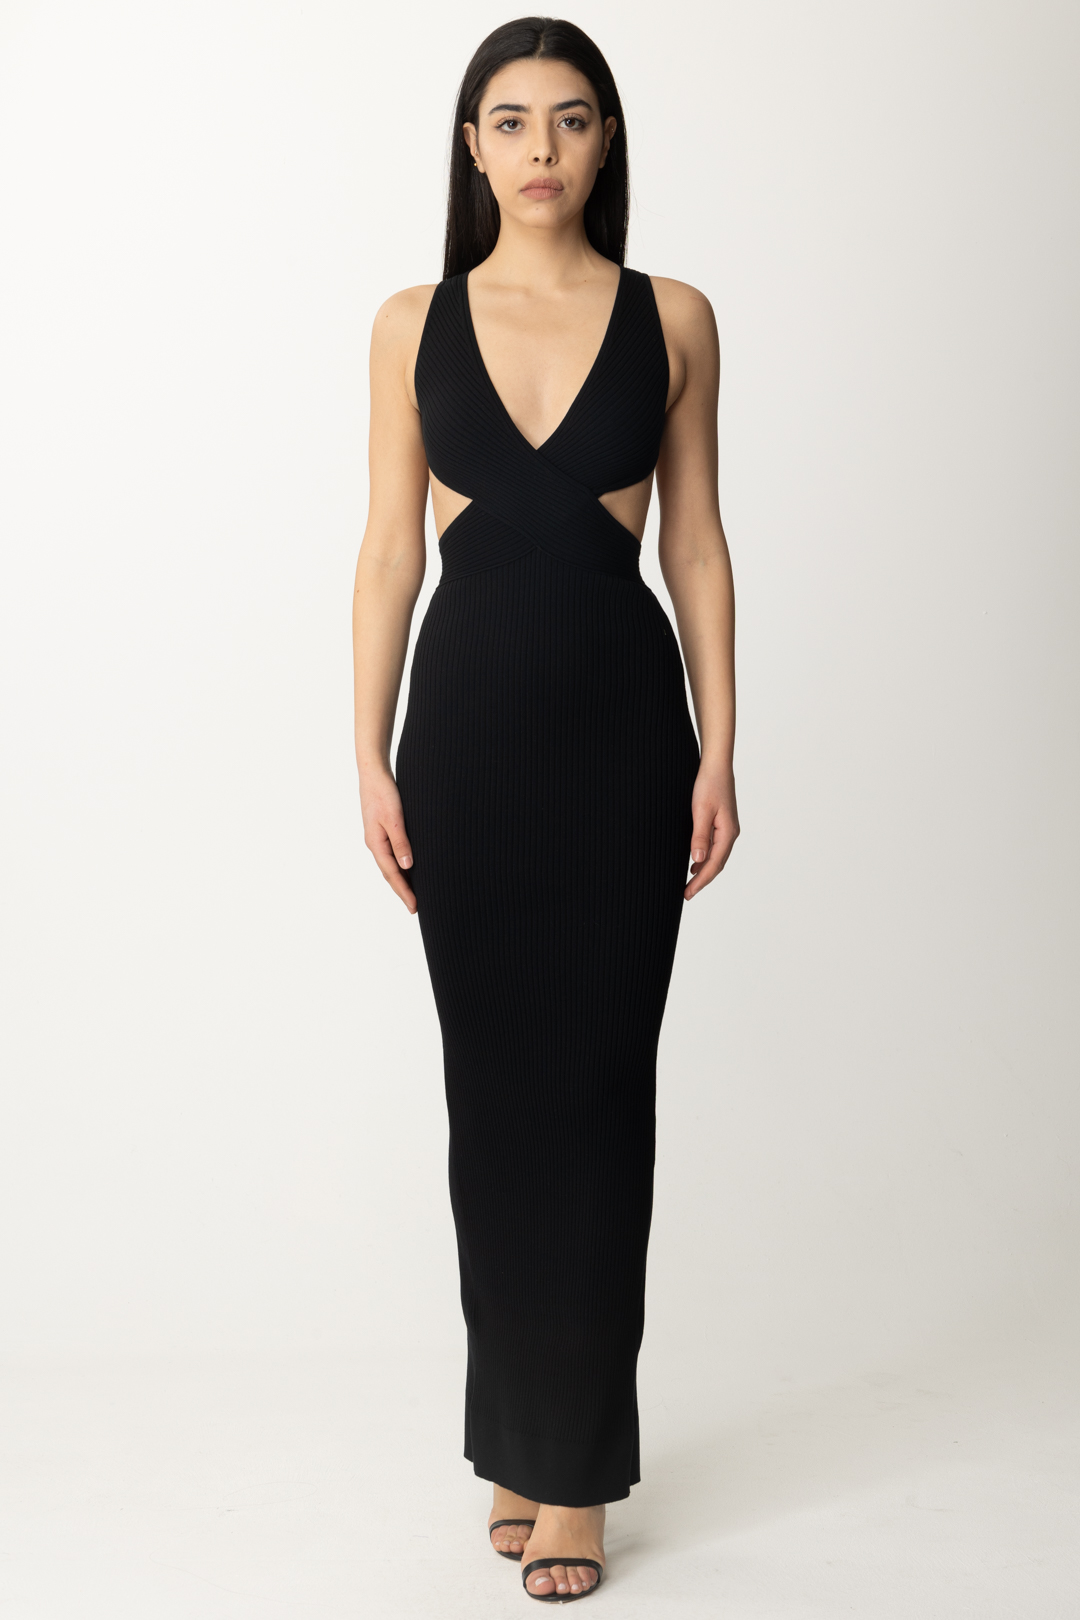 Preview: Elisabetta Franchi Red Carpet Dress in Knit with Cut-Out Nero